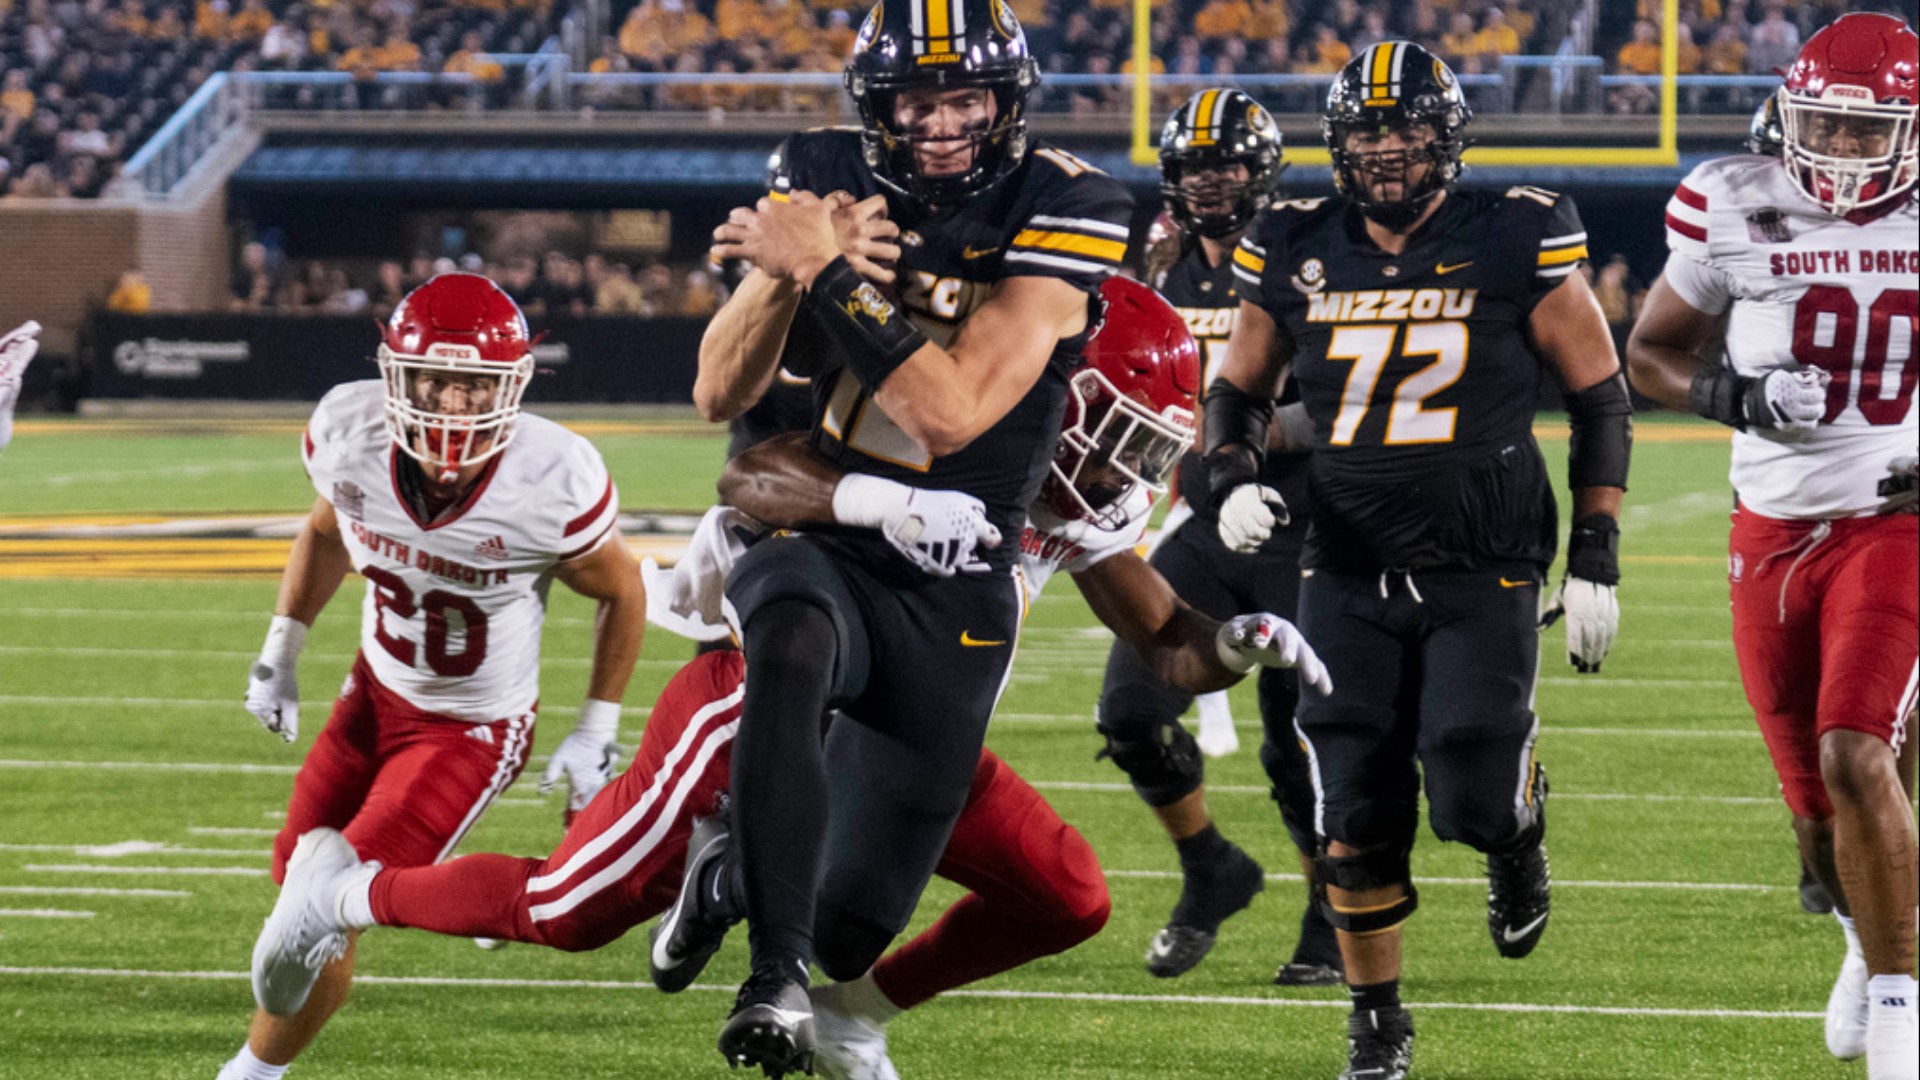 Brady Cook threw for 172 yards and a touchdown while running for another score in only one half of work. Missouri beat South Dakota 35-10.